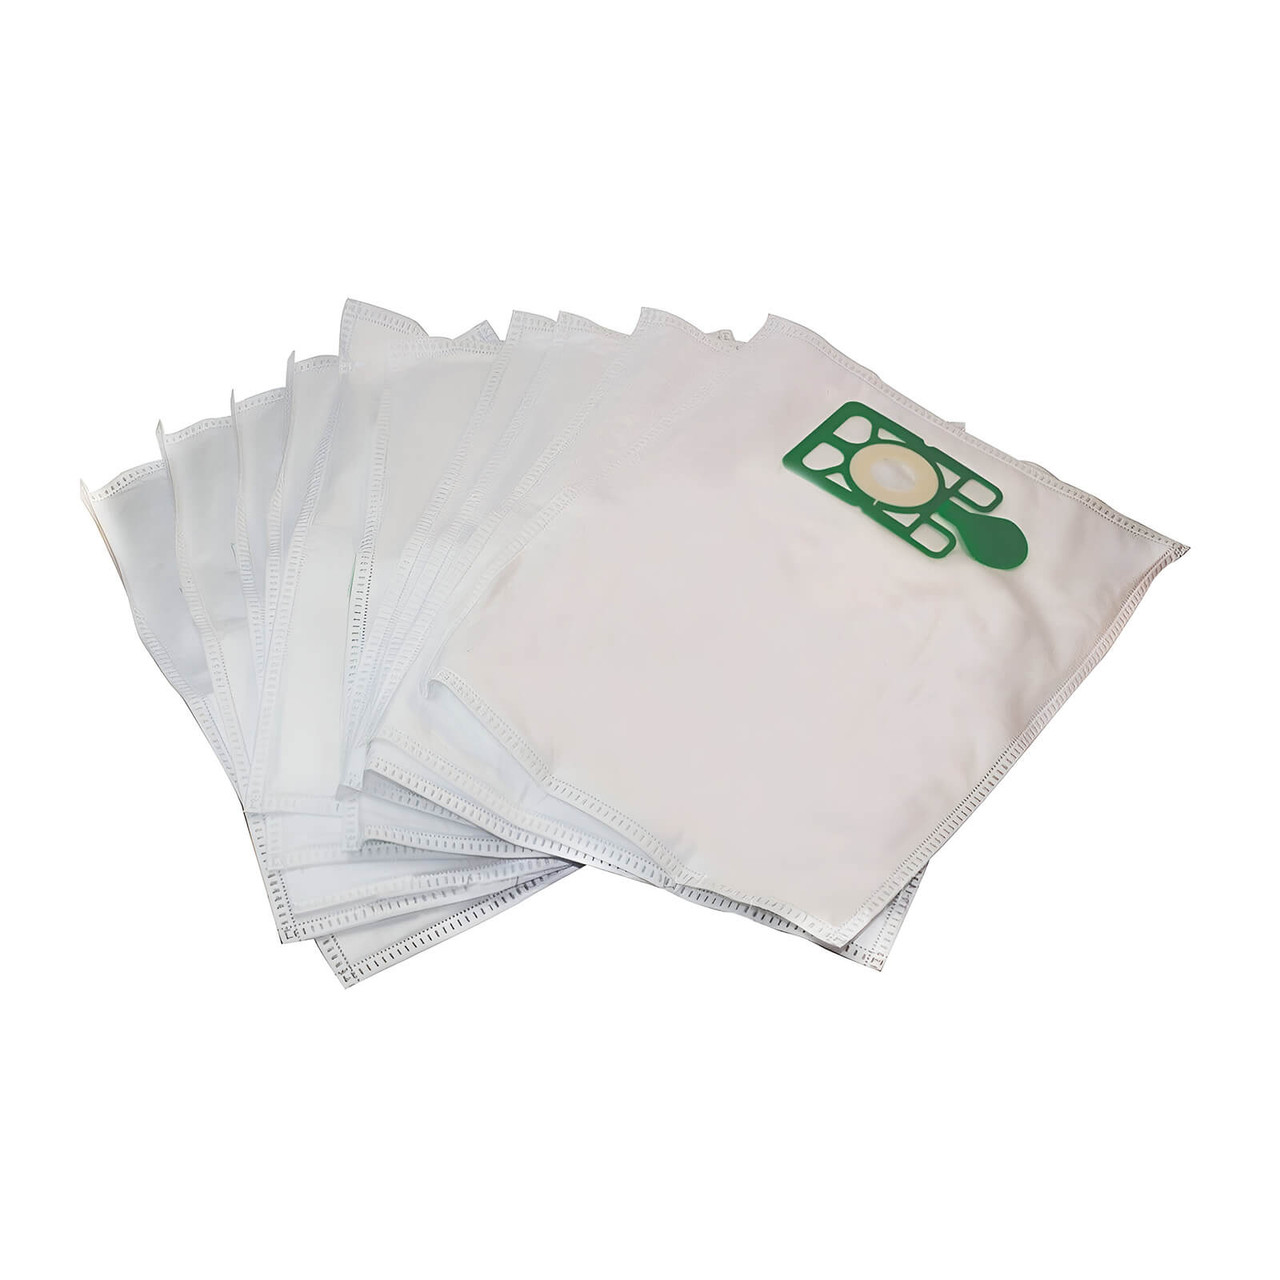 Dencon Accessories - Numatic HVC Henry Hoover Dust bags ( 10 Pack)